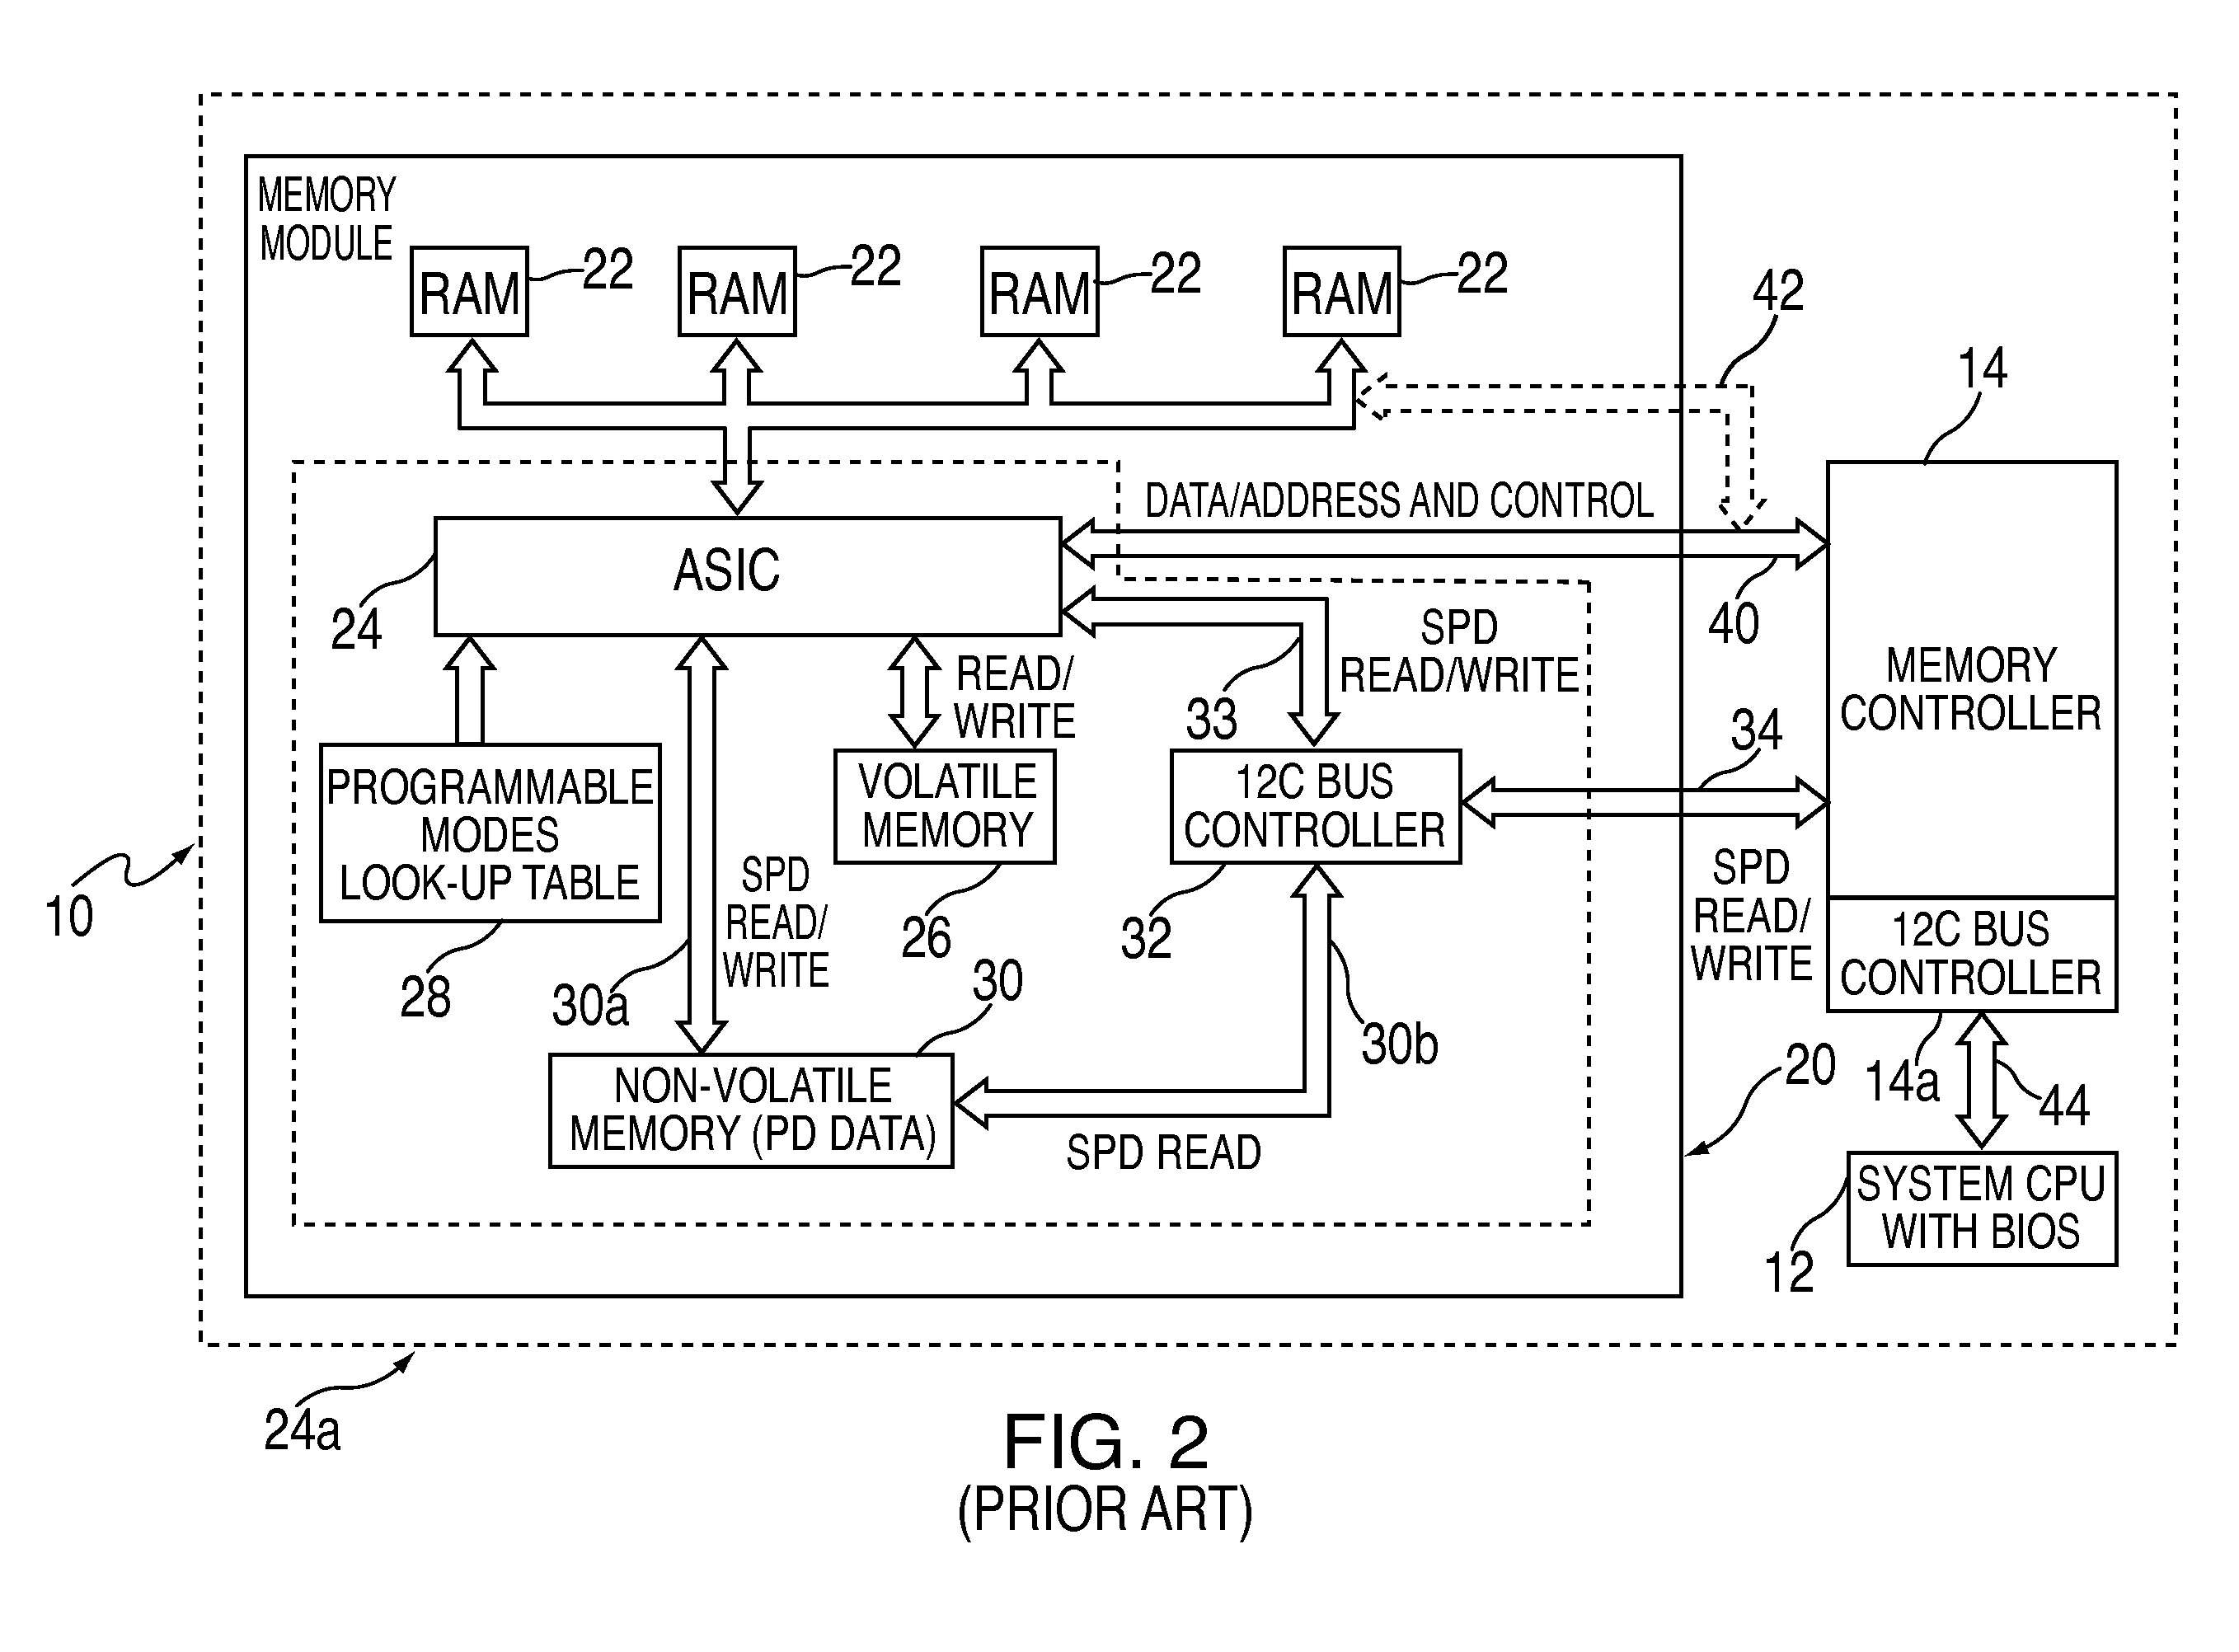 Systems and methods for program directed memory access patterns